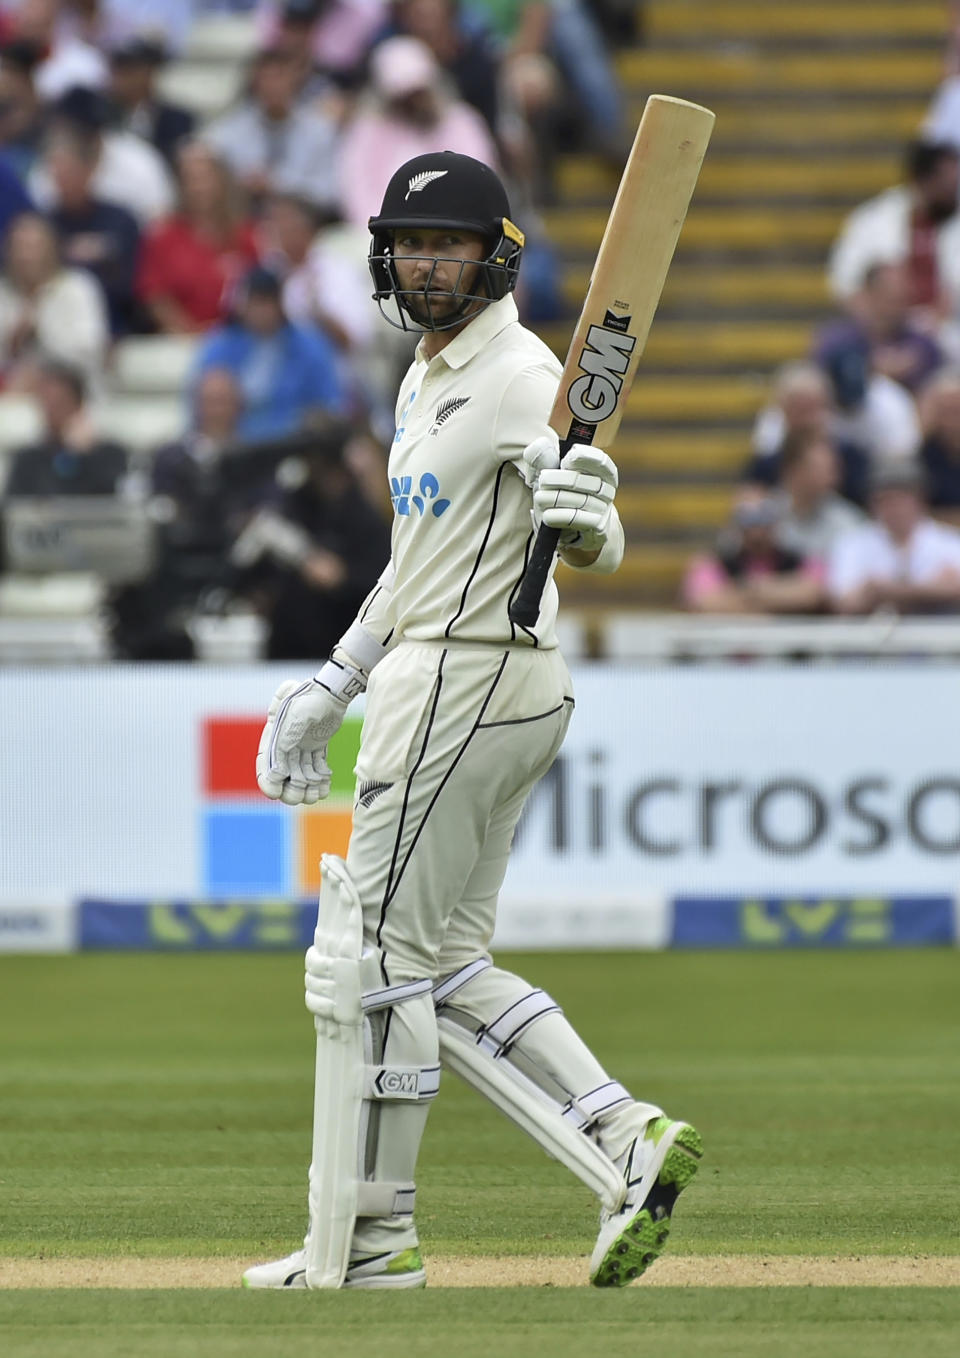 New Zealand's Devon Conway raises his bat to celebrate scoring fifty runs during the second day of the second cricket test match between England and New Zealand at Edgbaston in Birmingham, England, Friday, June 11, 2021. (AP Photo/Rui Vieira)